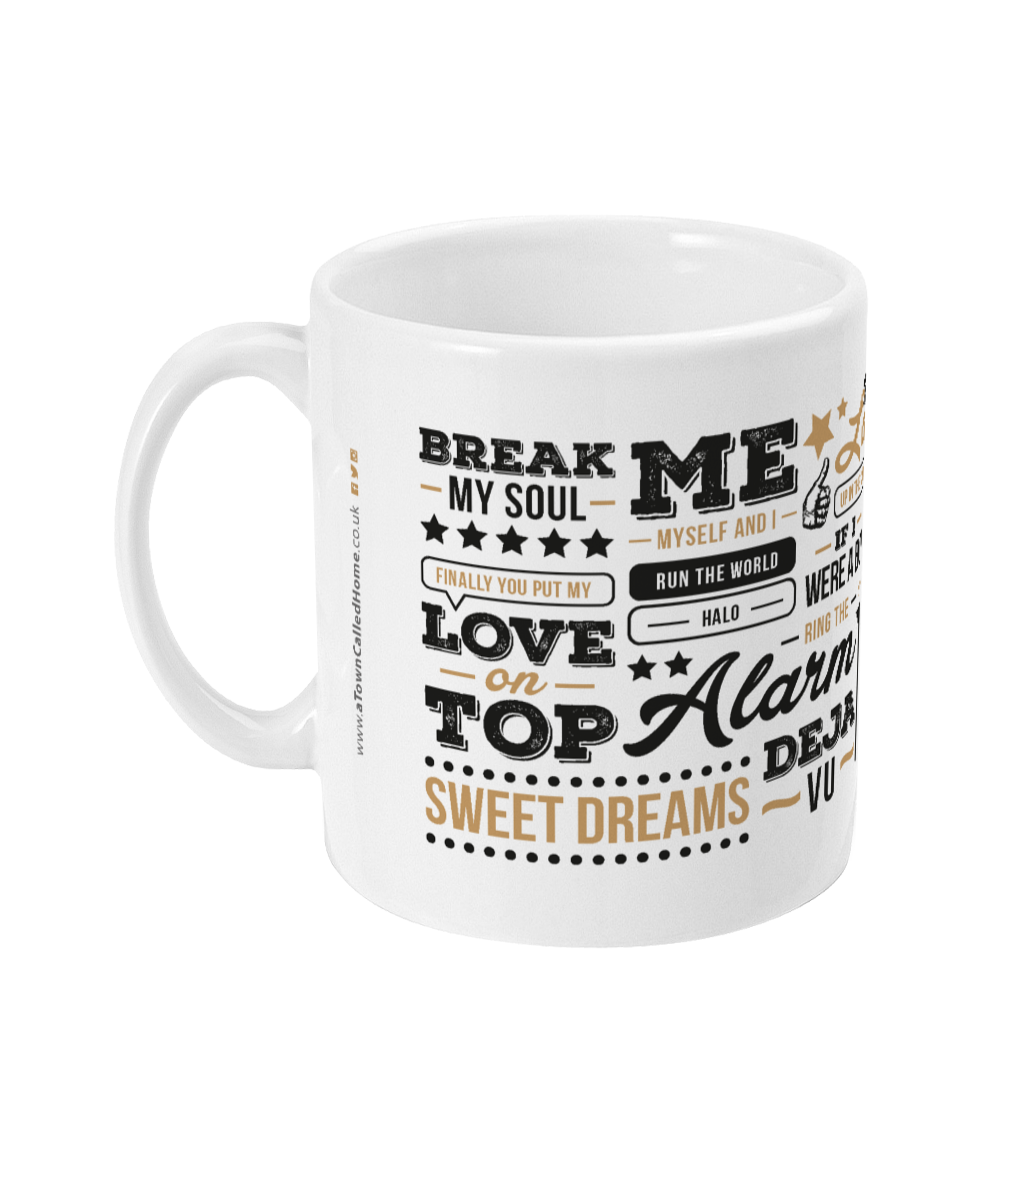 High Quality 11oz mug, celebrating musician Beyonce.  Designed & made in the UK.  A unique mug perfect for Beyonce fans.  Features illustration of 'Queen B' and includes the names of some of her most popular lines from her most loved songs from over the years,  including 'Single ladies', 'crazy in love', 'If I were a boy' and 'XO'. 